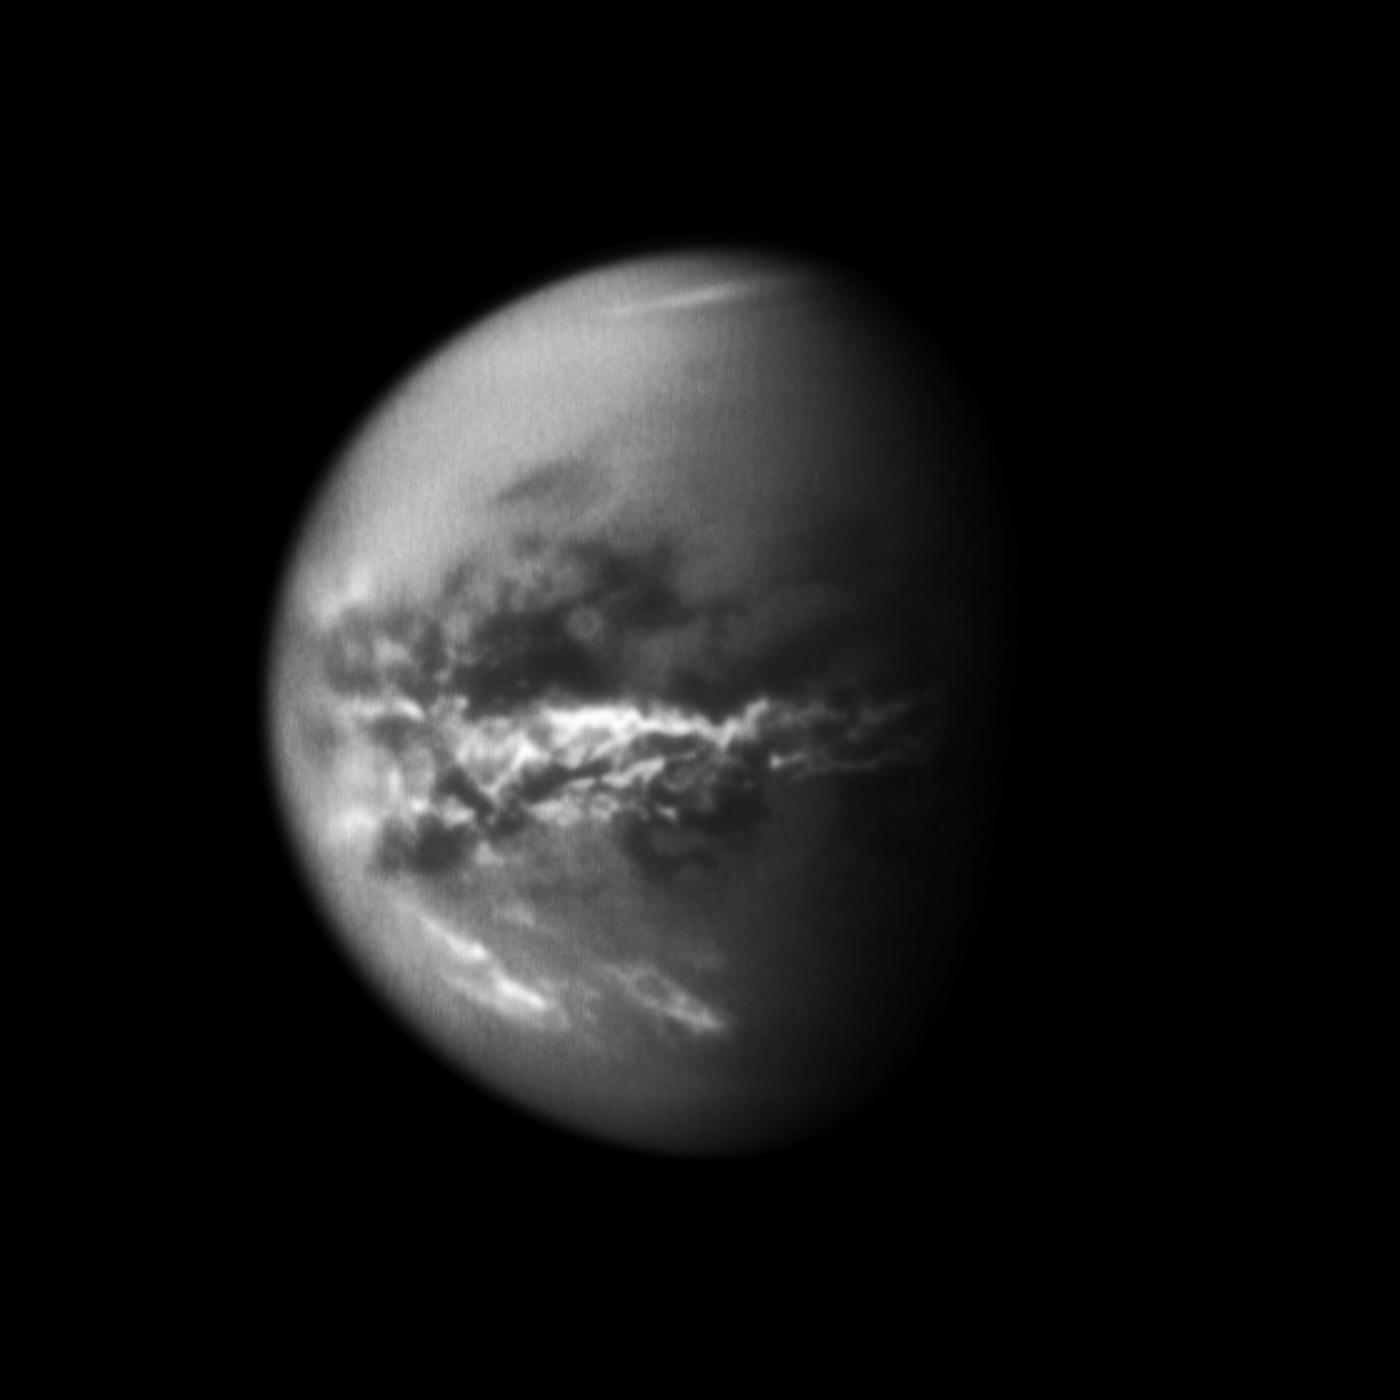 NASA's Cassini spacecraft chronicles the change of seasons as it captures clouds concentrated near the equator of Saturn's largest moon, Titan.